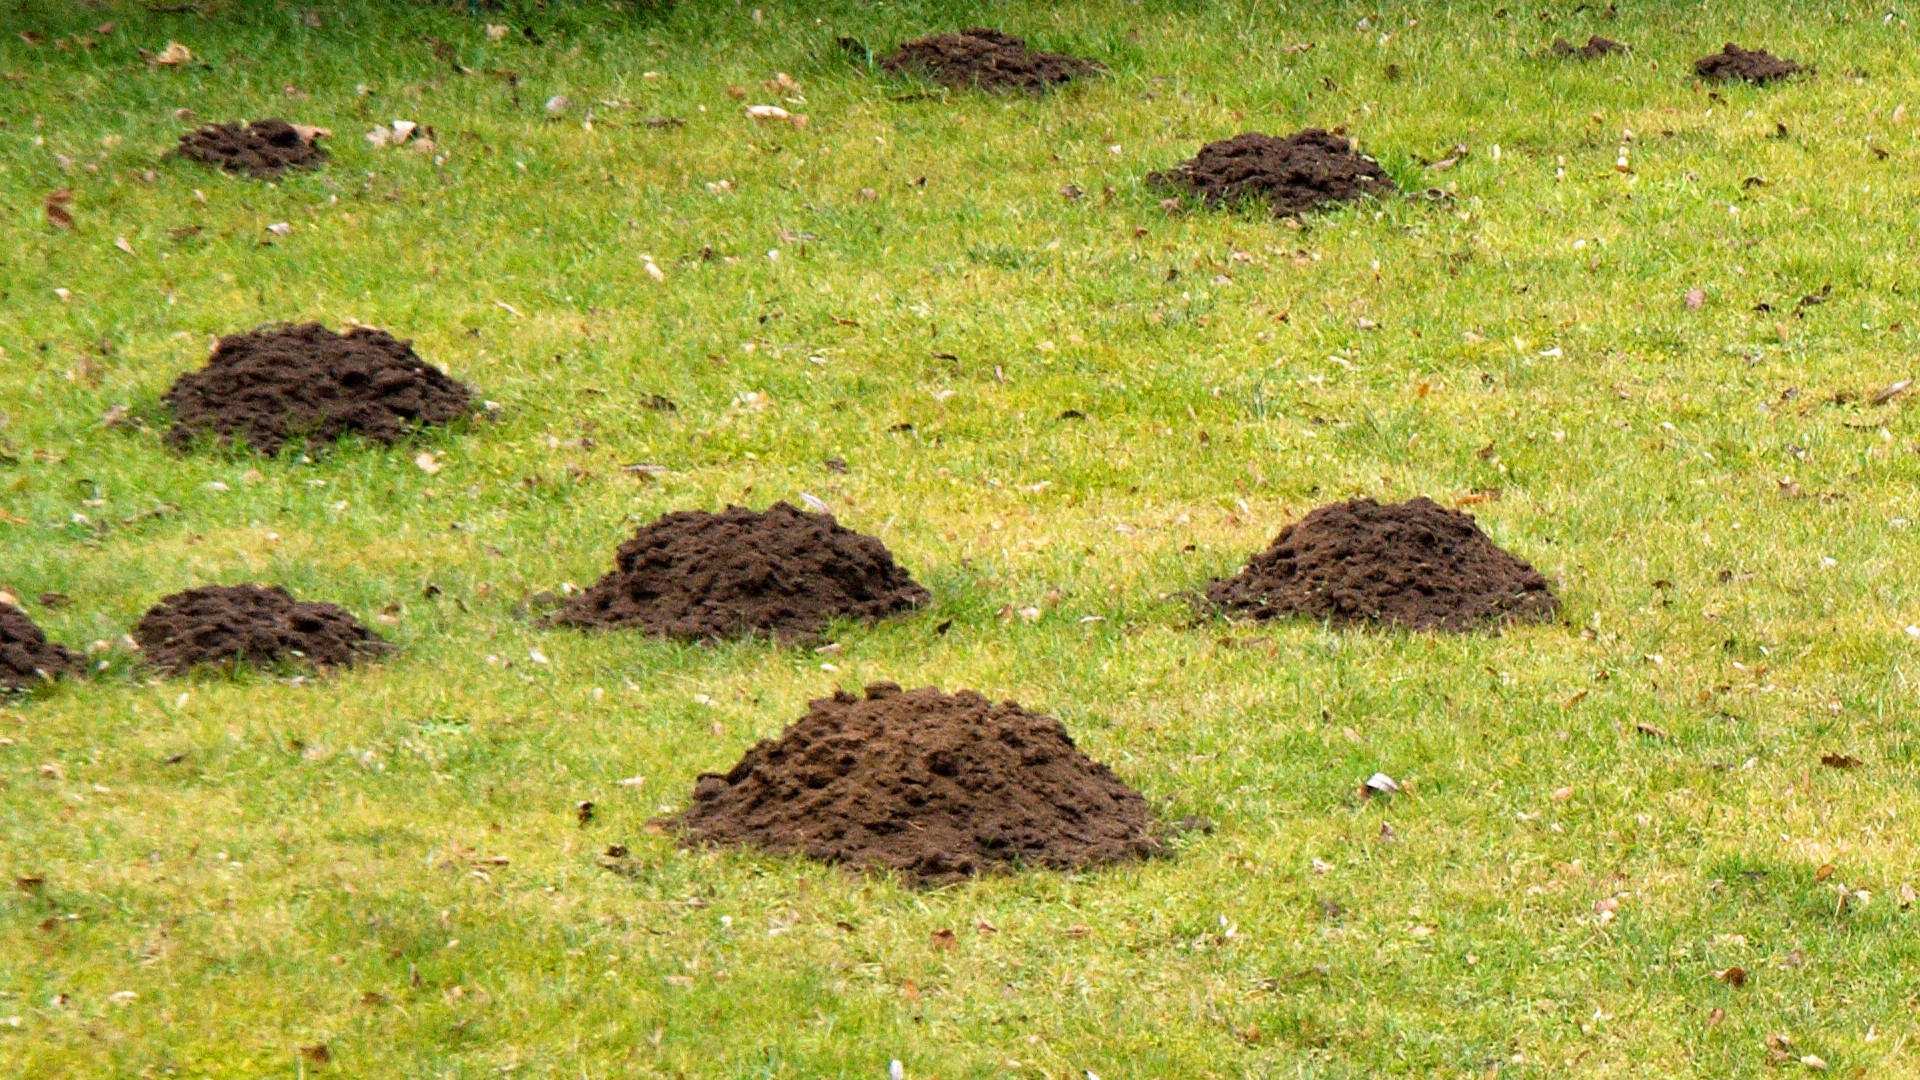 Pat Sullivan shares tips on getting those pesky moles out of your yard.